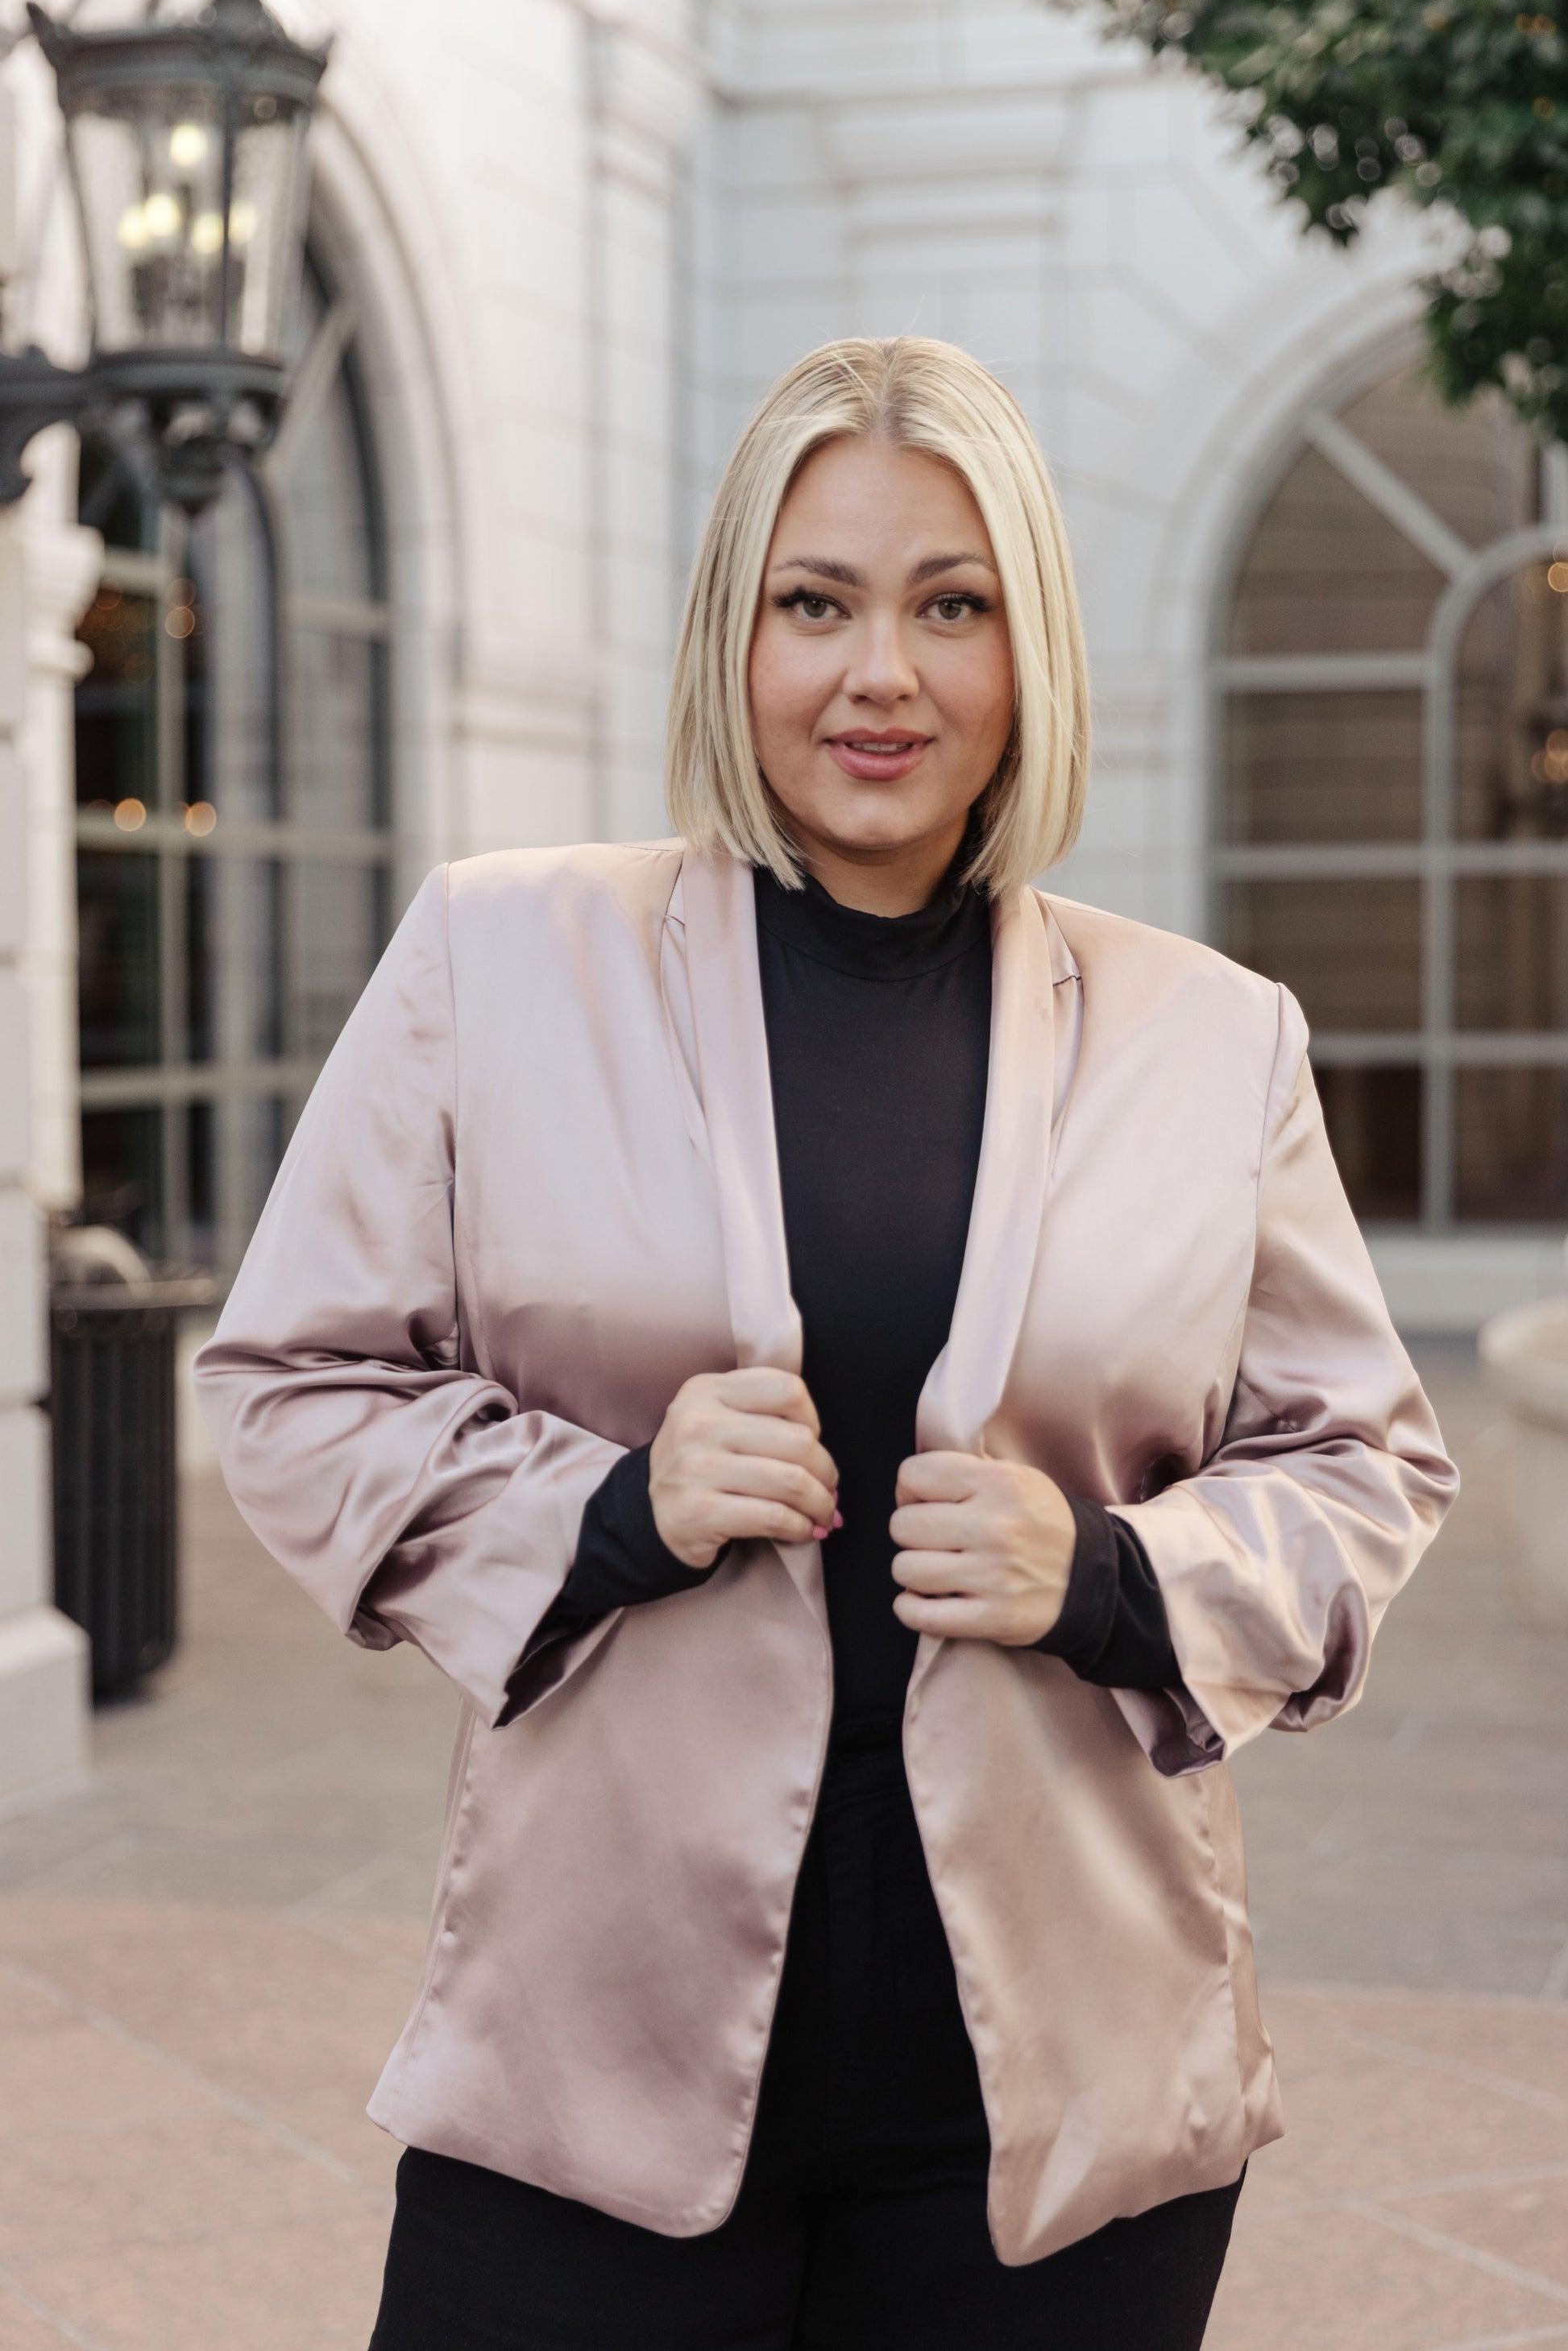 Transform your look into a sophisticated statement with the Champagne and Roses Satin Blazer. Crafted from silky poly satin with shawl collar, shoulder pads, ruched sleeves, open front, and side seam pockets, this essential blazer will complete your stylish ensembles with unique sophistication. Style it with the matching shorts for a head-turning, chic look. S - 3X